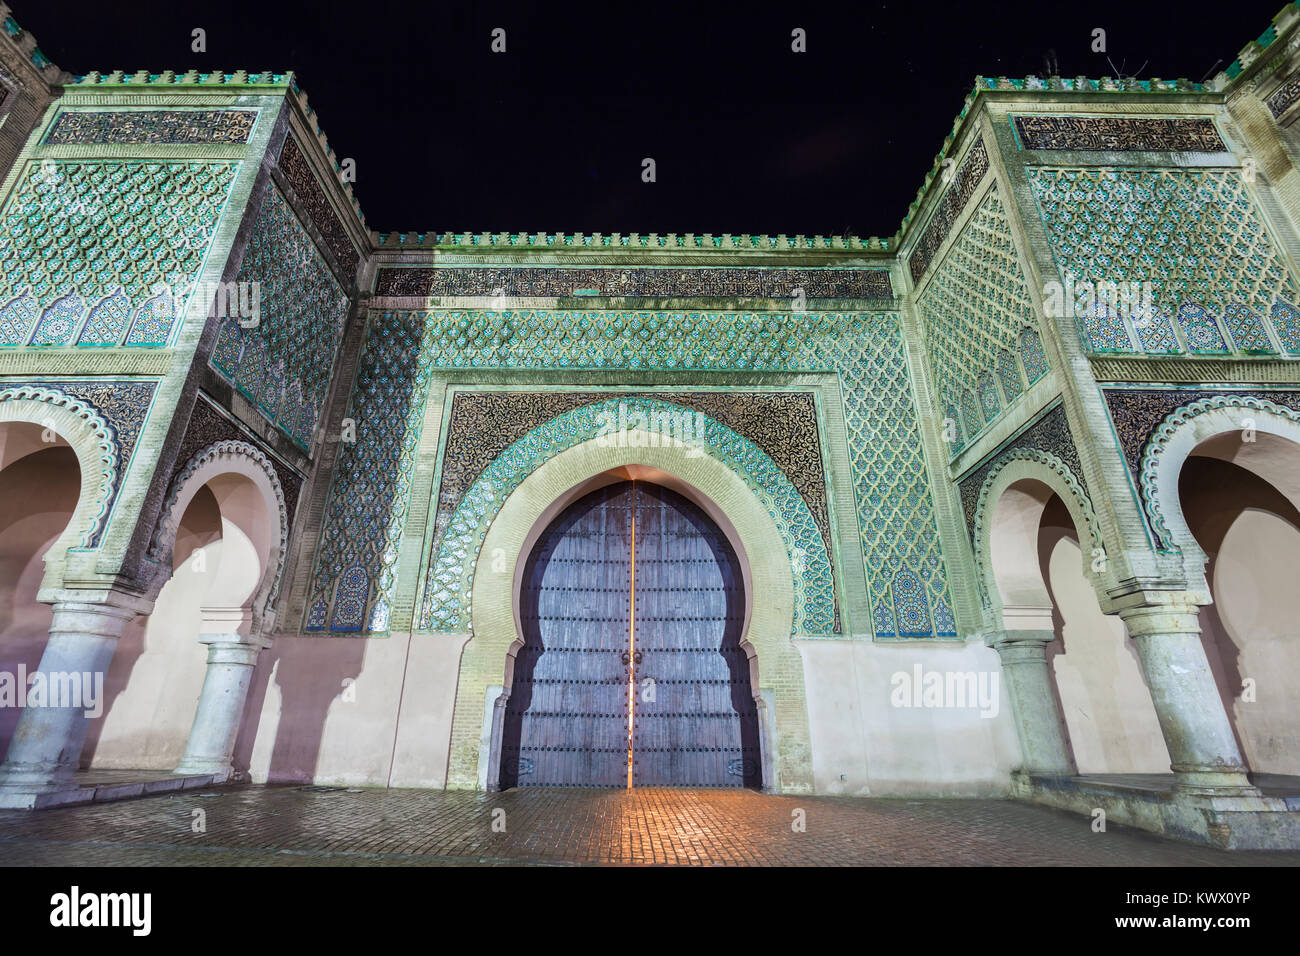 The Bab Mansour in Meknes, Morocco at night. Gate Bab Mansour Gate named after the architect, El-Mansour. Gate Bab Mansour is a main gate in Meknes, M Stock Photo